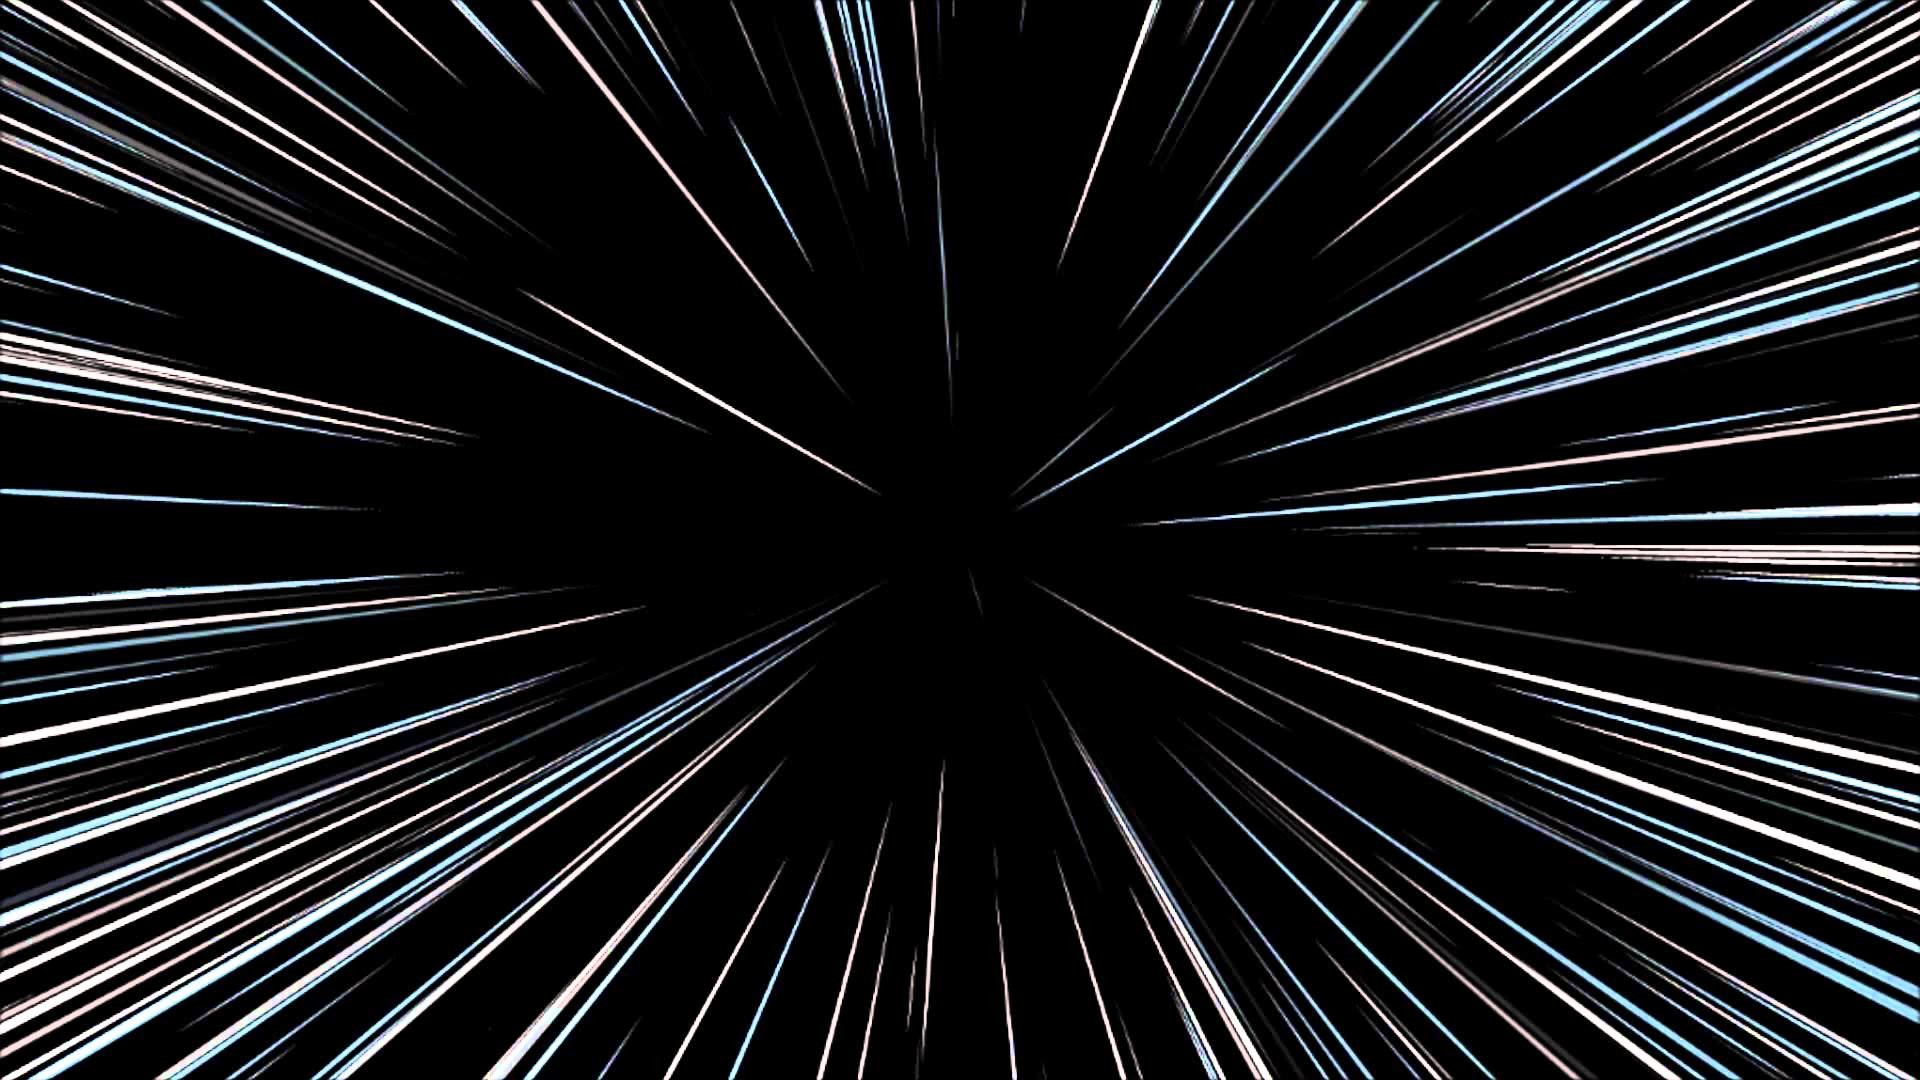 1920x1080 star wars jump to lightspeed in reverse as viewed from rear of .